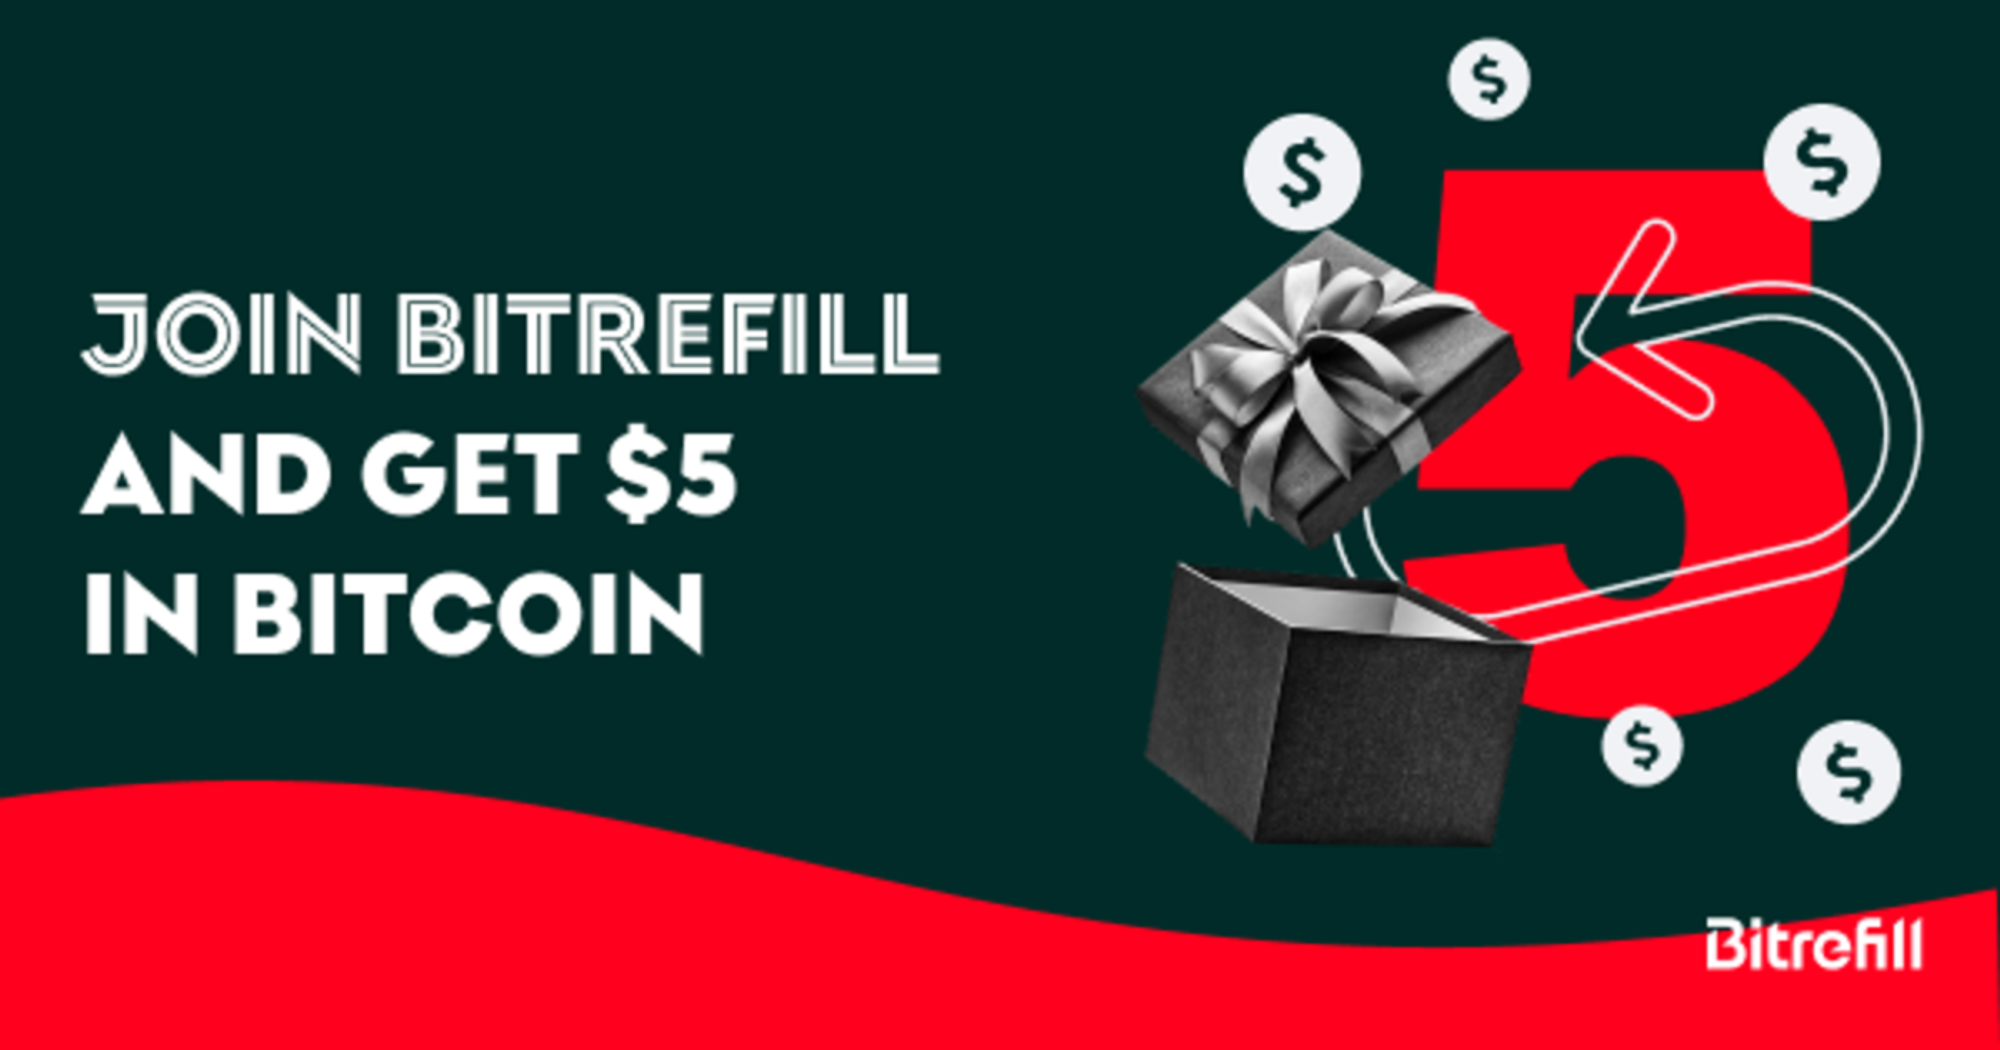 Join me on Bitrefill! We both get $5 in rewards when you spend $50. Let's earn together!